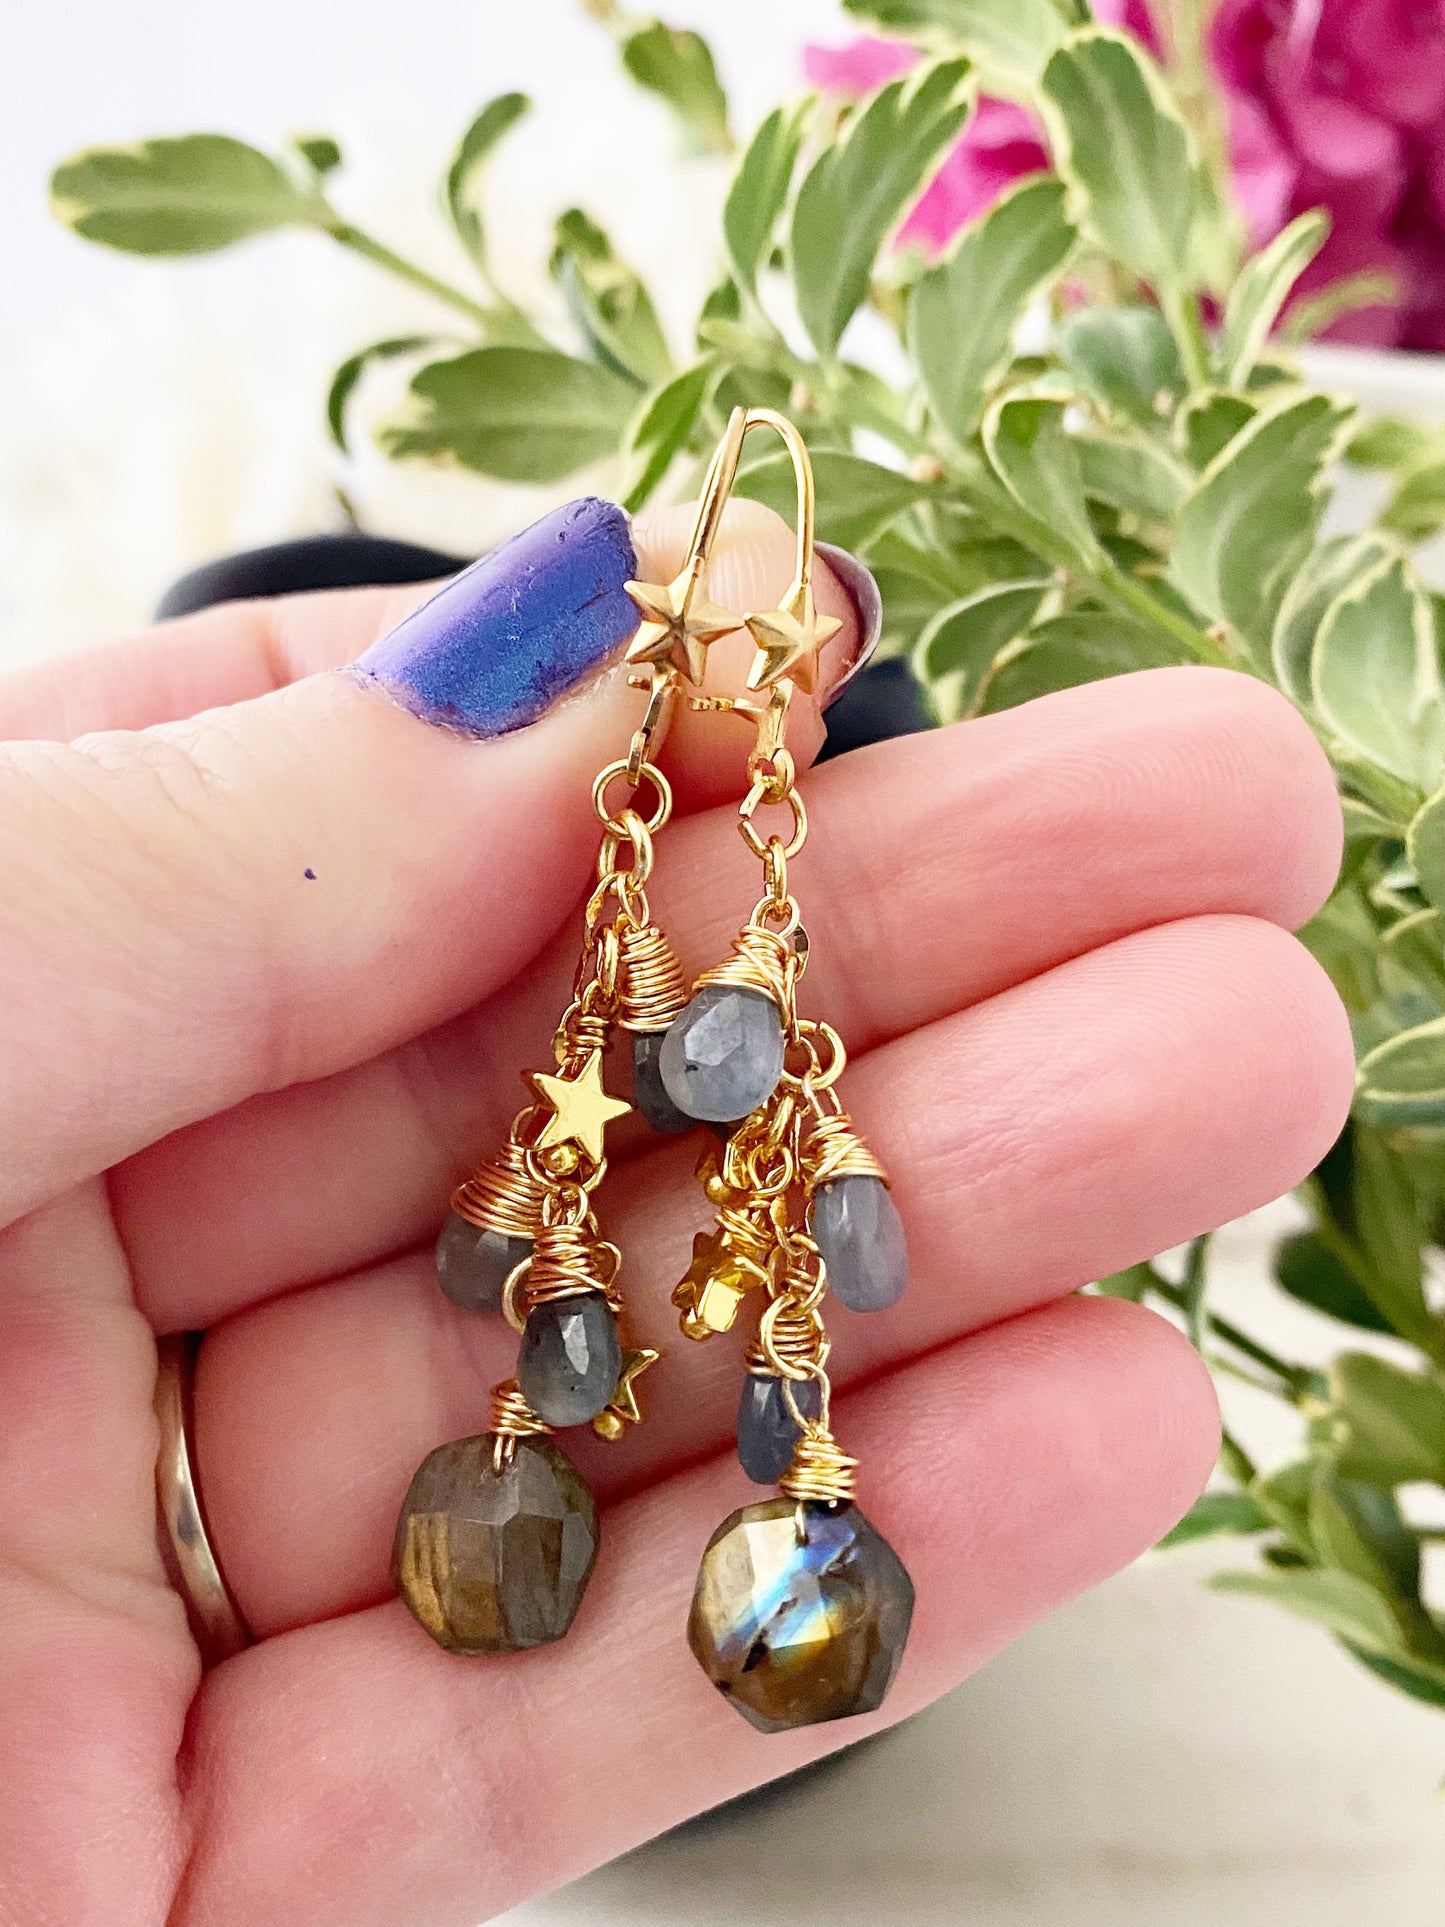 Stars and sapphires. Labradorite, Sapphire stone, star charm, gold earrings - Andria Bieber Designs 